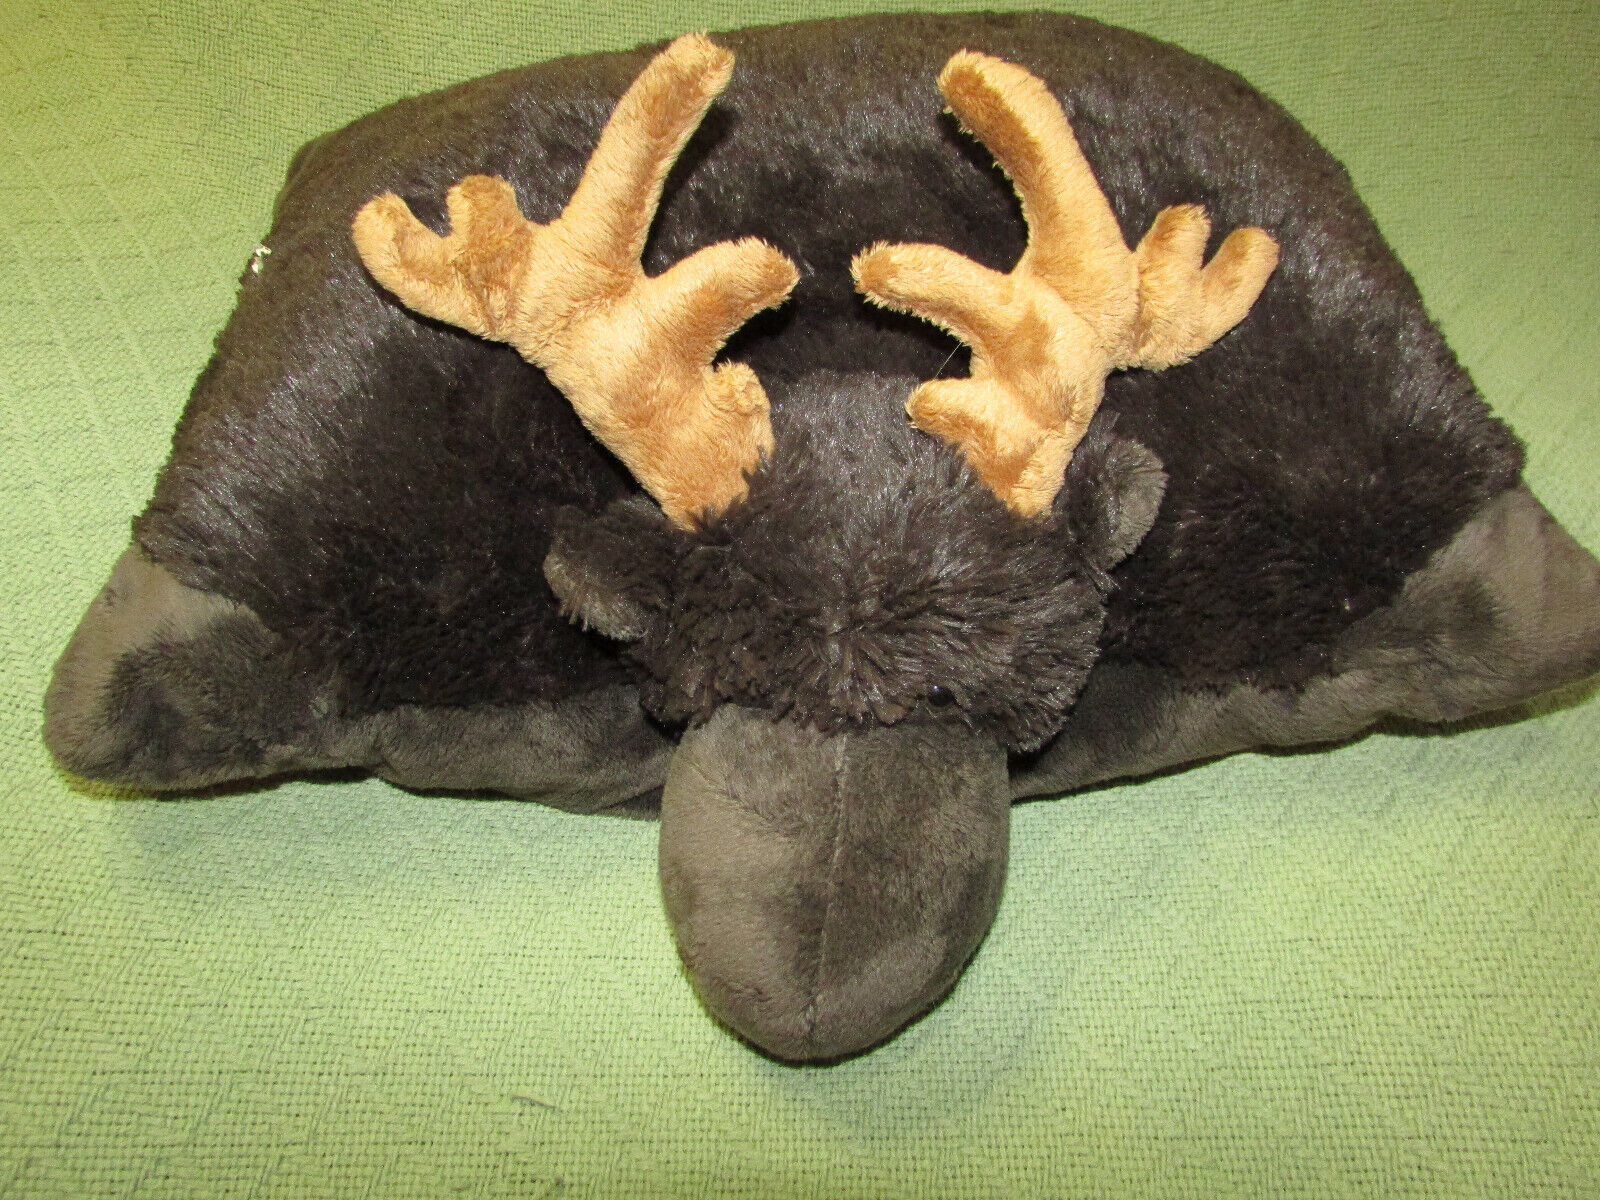 Primary image for 18" PILLOW PETS MOOSE STUFFED ANIMAL PLUSH PILLOW 2003 BROWN LARGE FOLD UP LOVEY